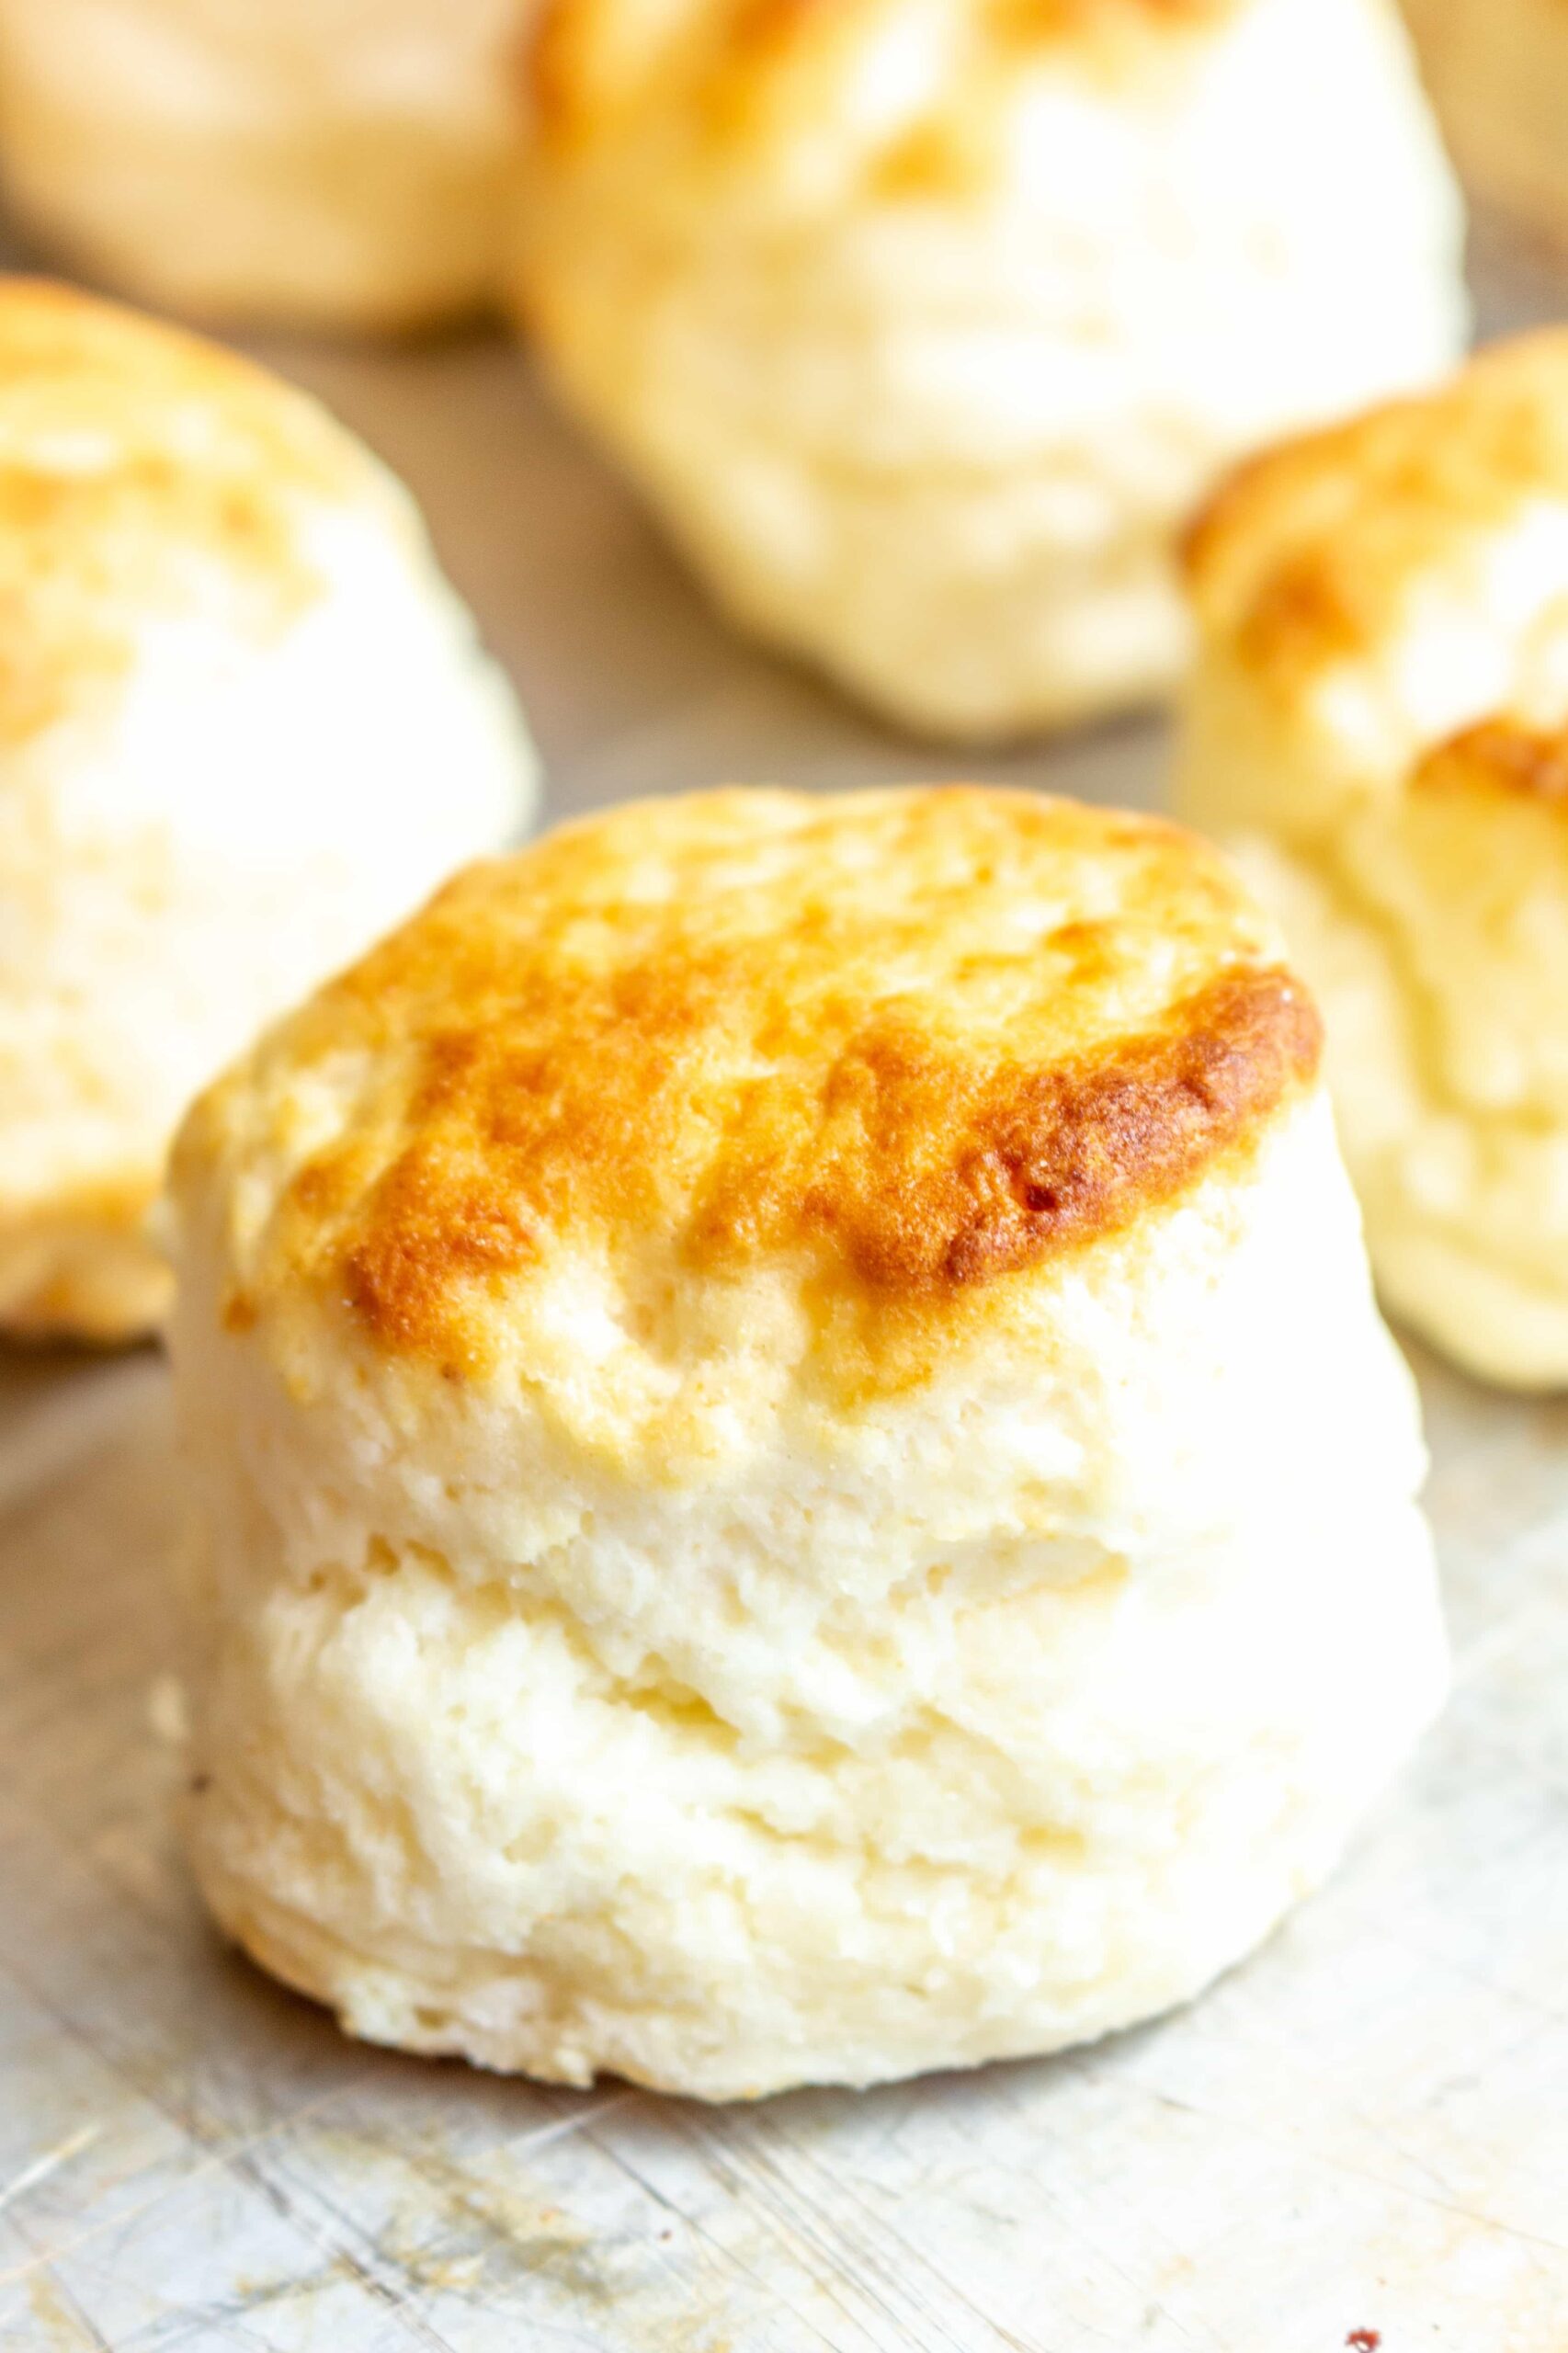  These biscuits are irresistibly buttery and deliciously crumbly.